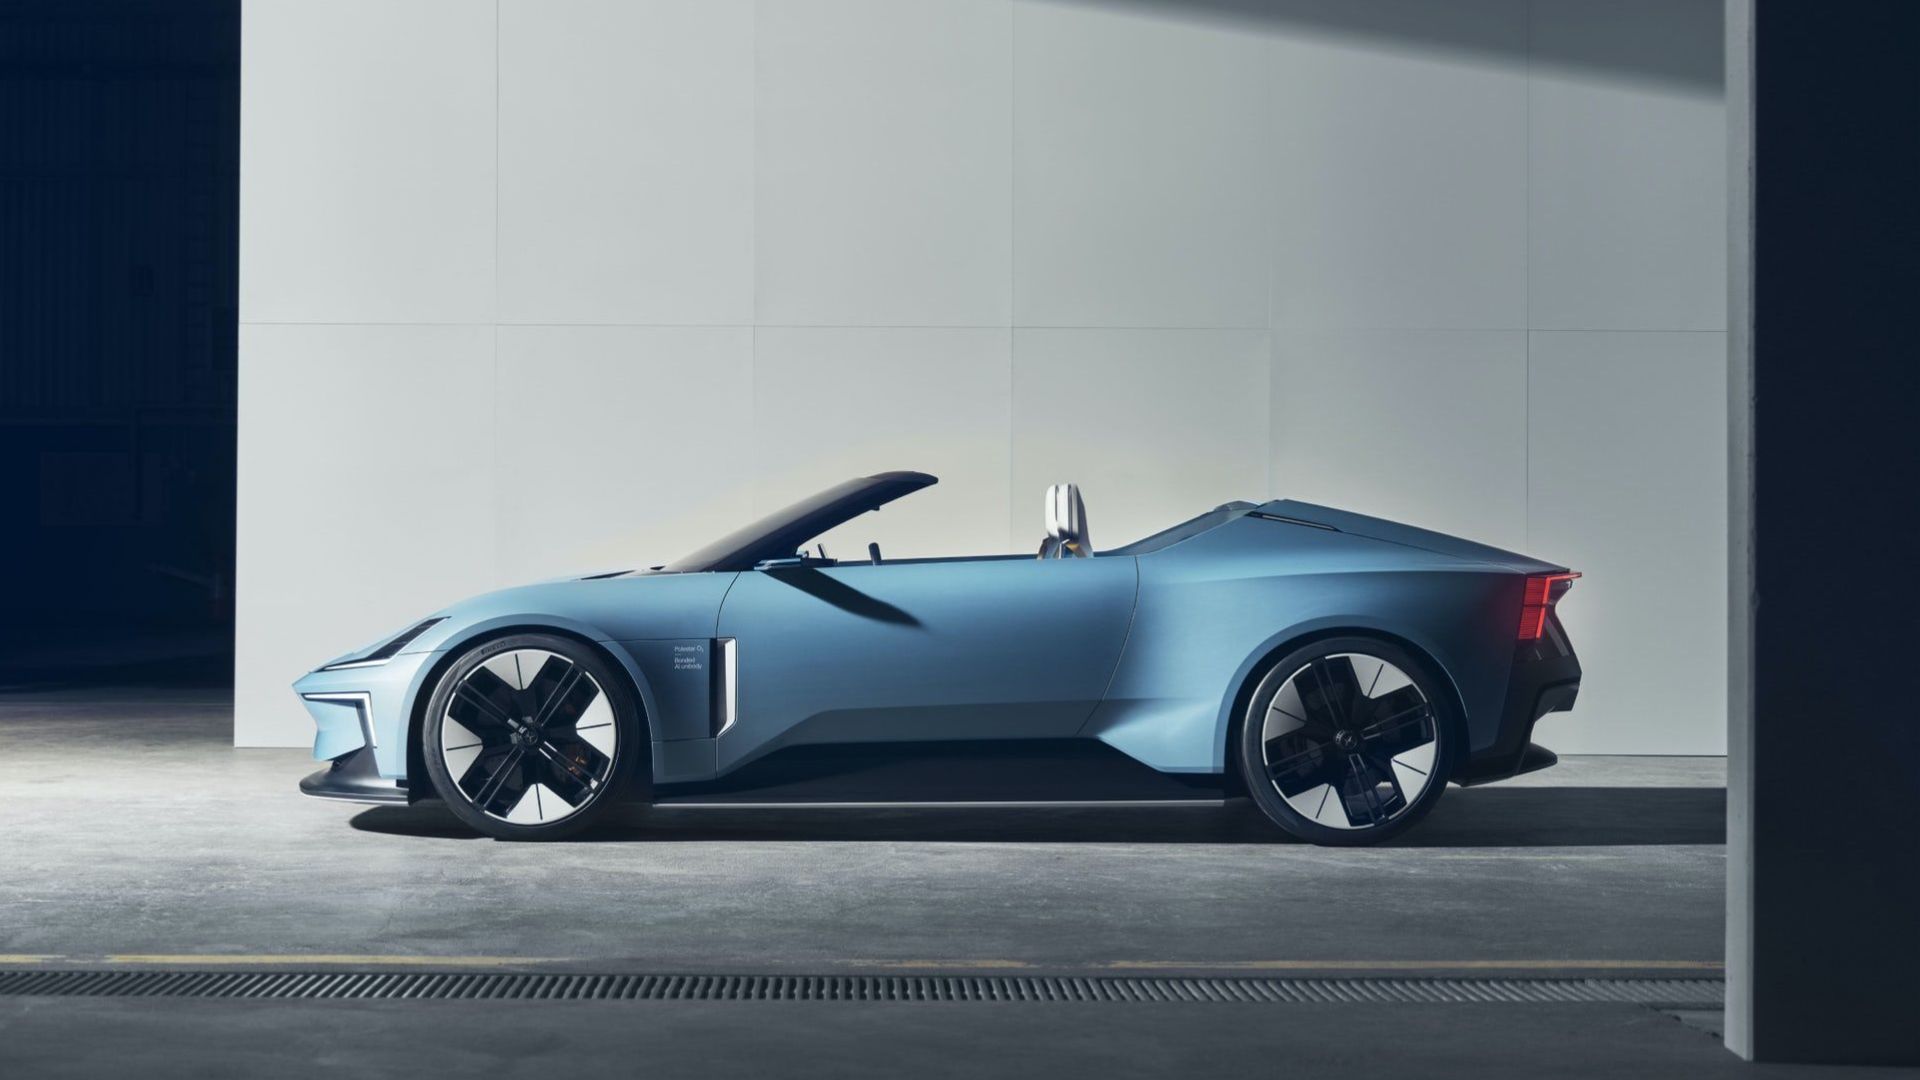 https://e-vehicleinfo.com/polestar-6-electric-roadster-concept-revealed-launch-in-2026/